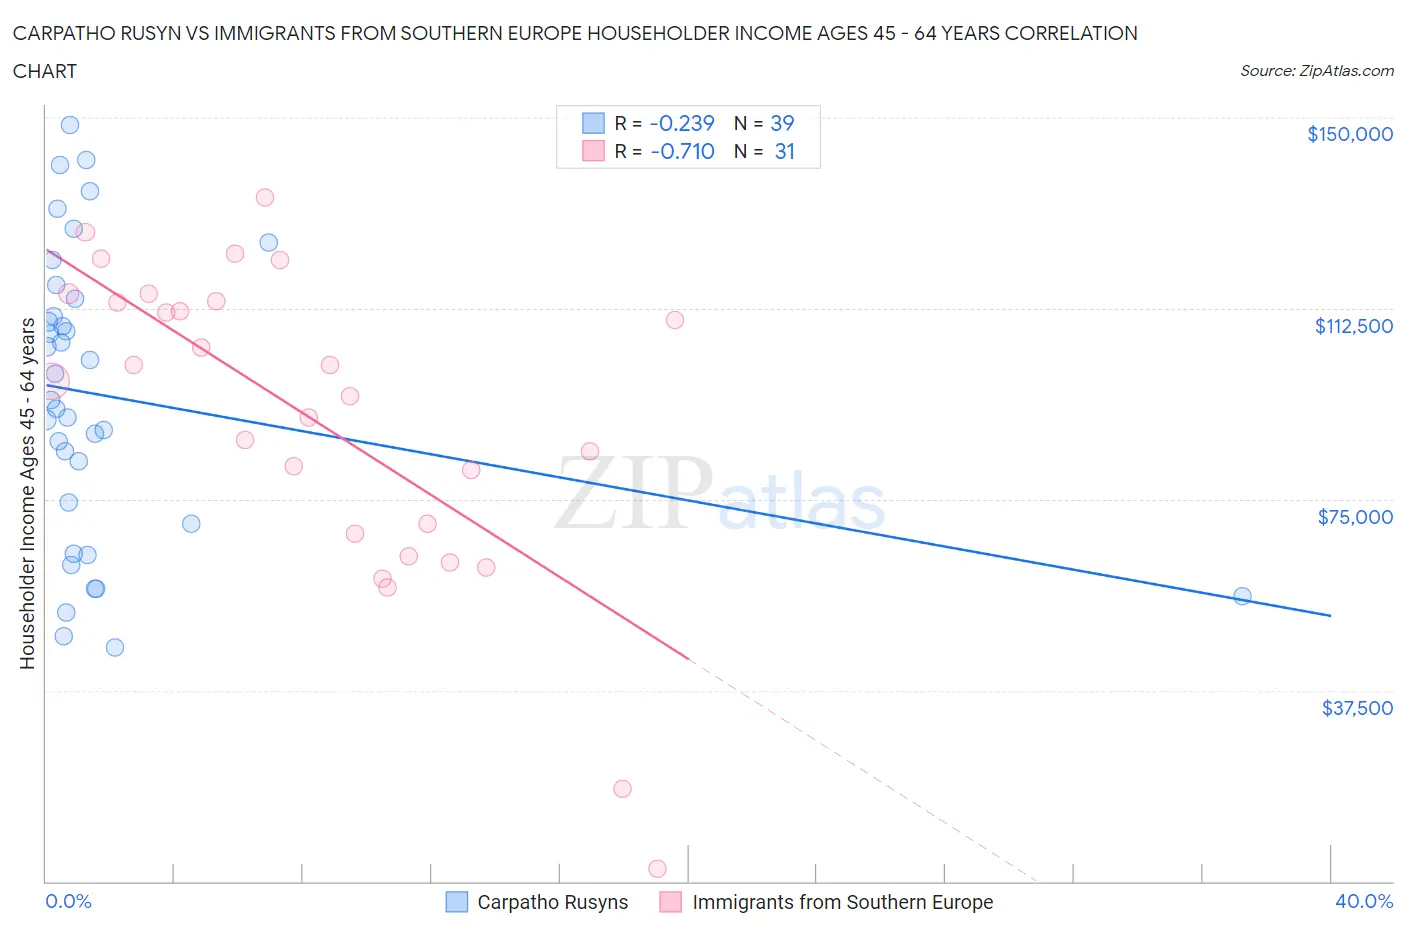 Carpatho Rusyn vs Immigrants from Southern Europe Householder Income Ages 45 - 64 years